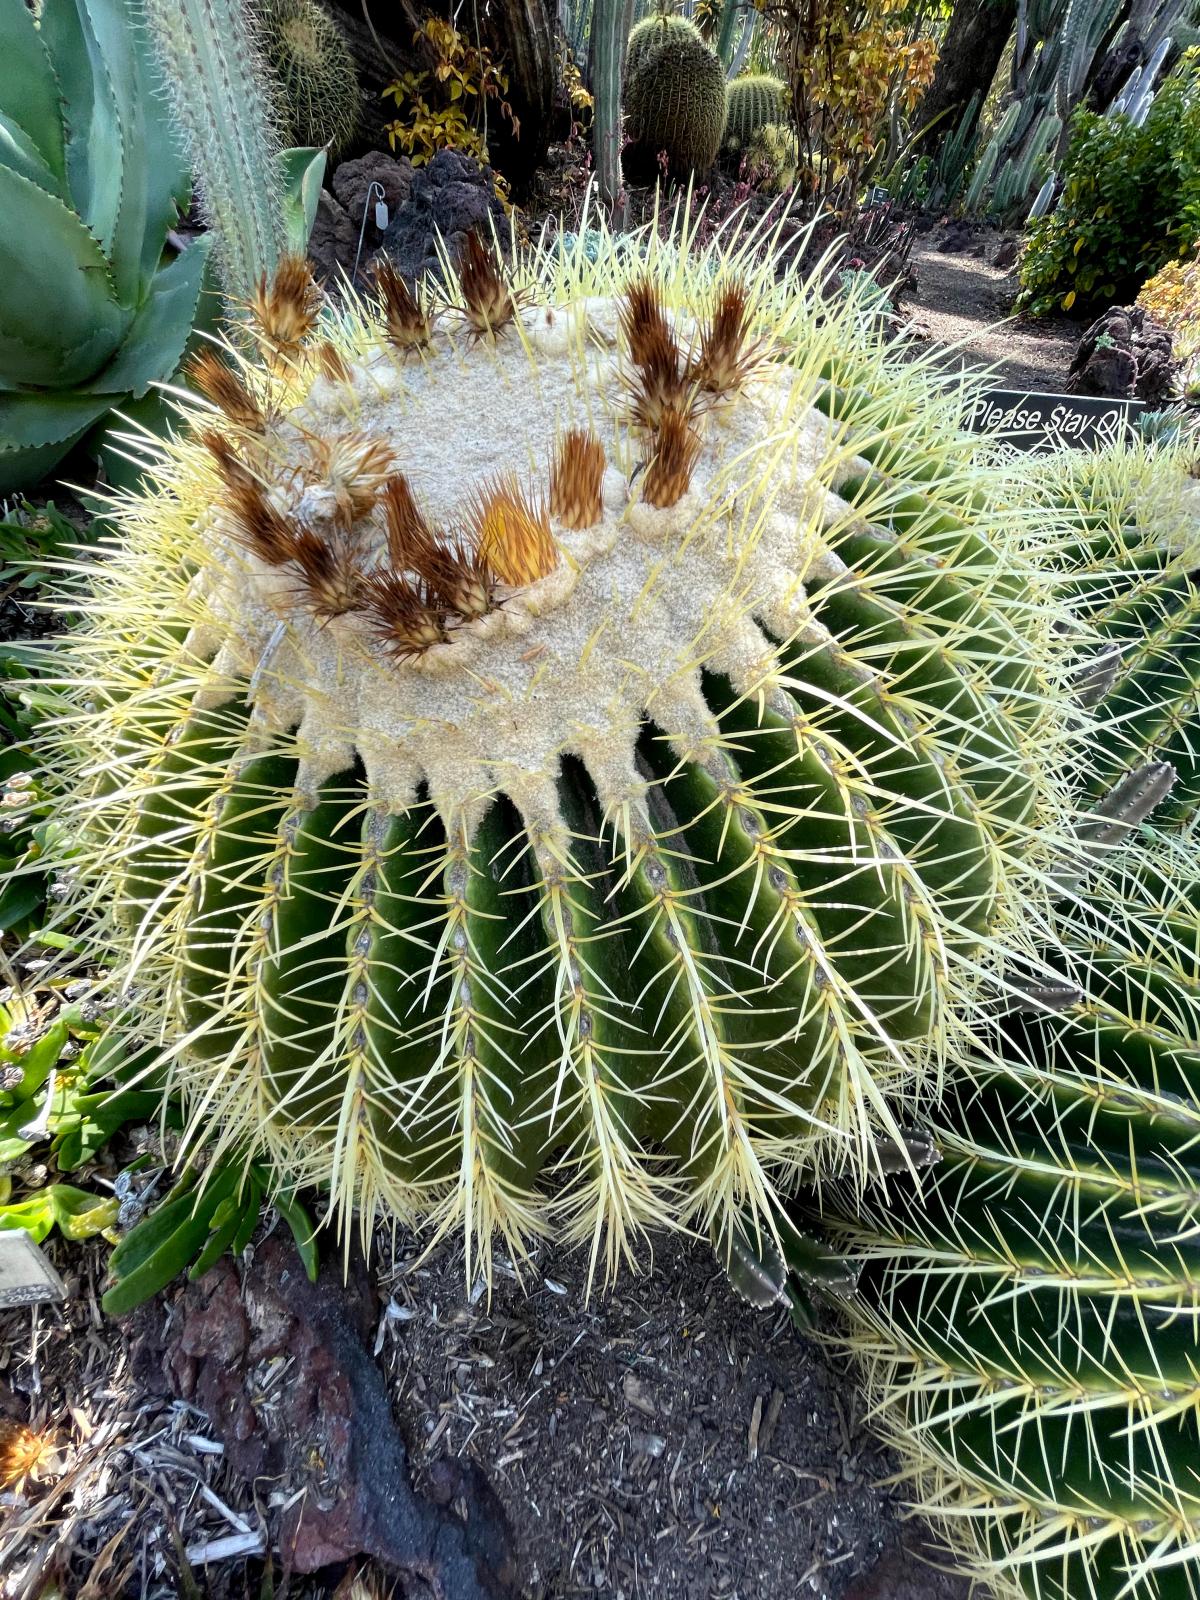 Spherical plant with ridges and yellow spine-like growths